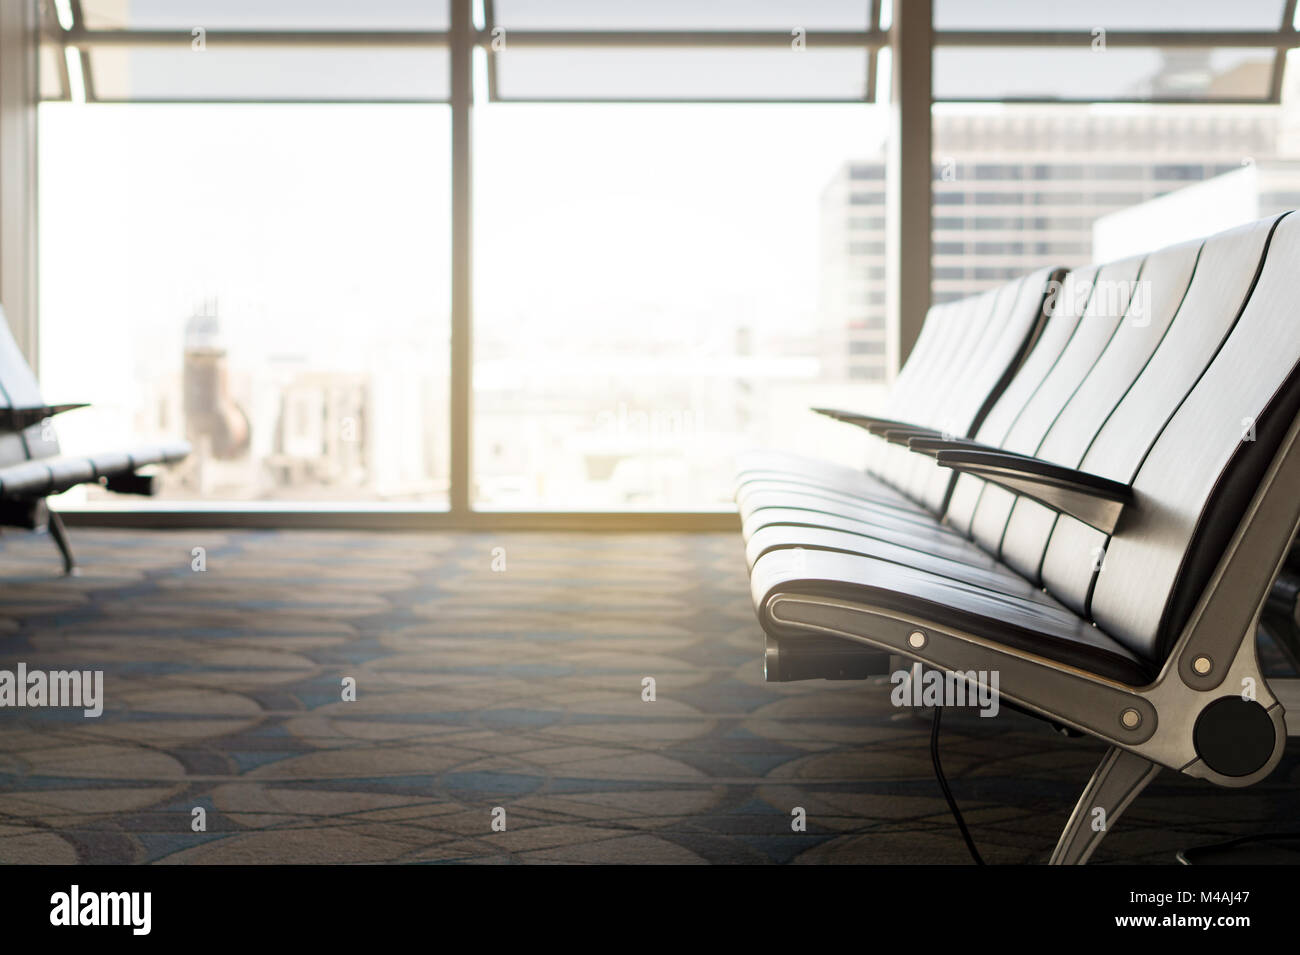 Waiting room at airport. Empty seats at gate in terminal. Light from window. Departure lounge. Stock Photo